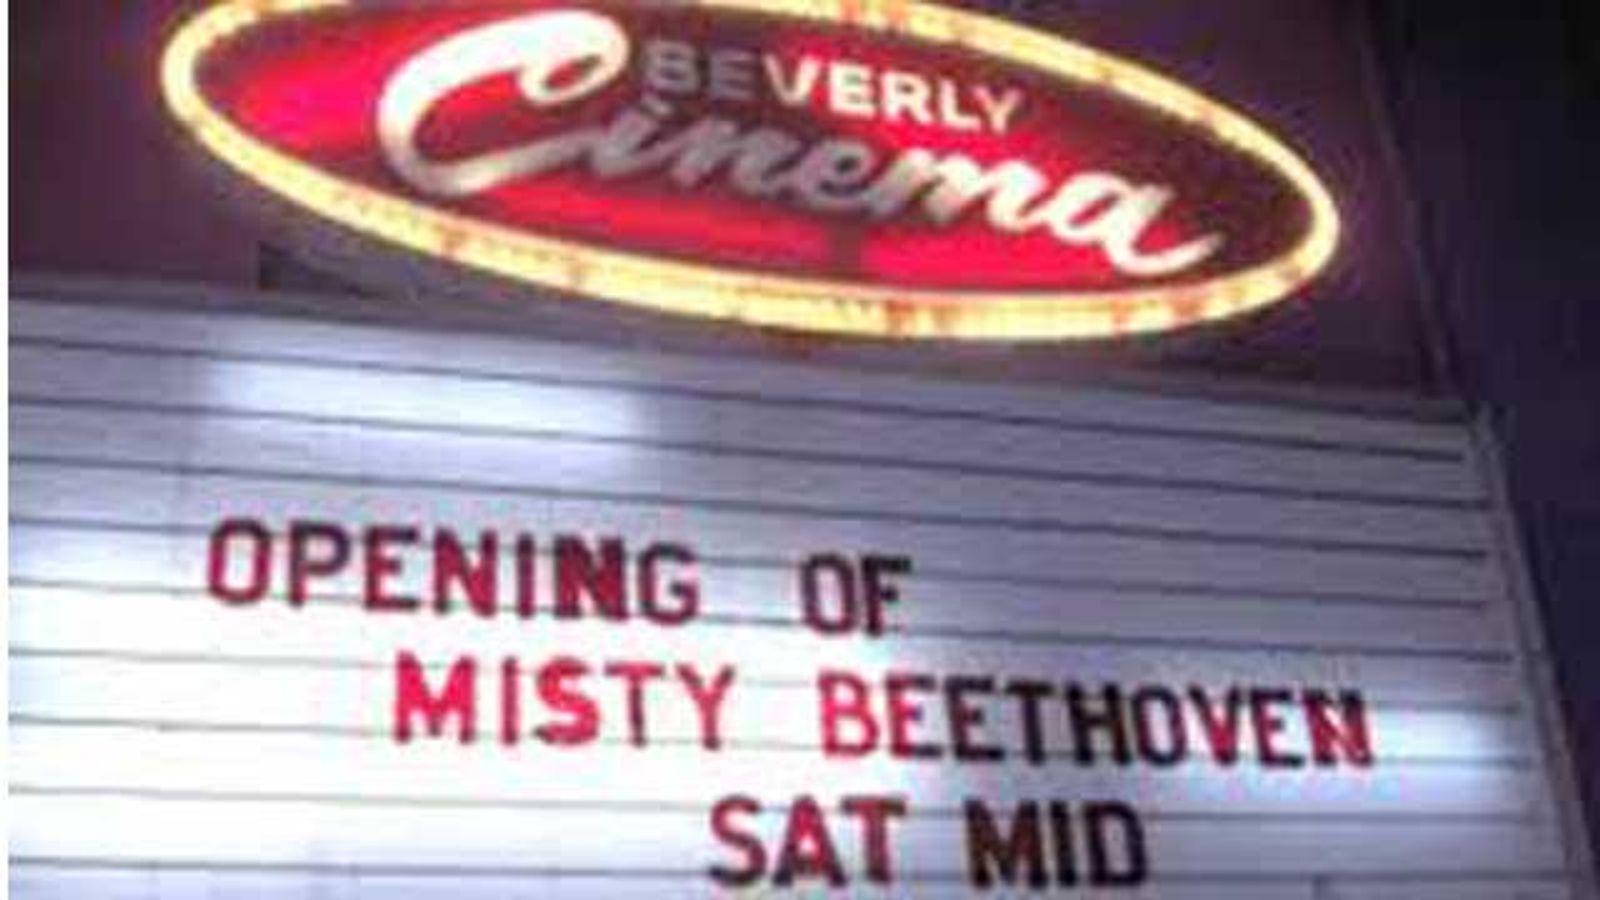 Be Part of 'The Opening of Misty Beethoven' Audio Commentary